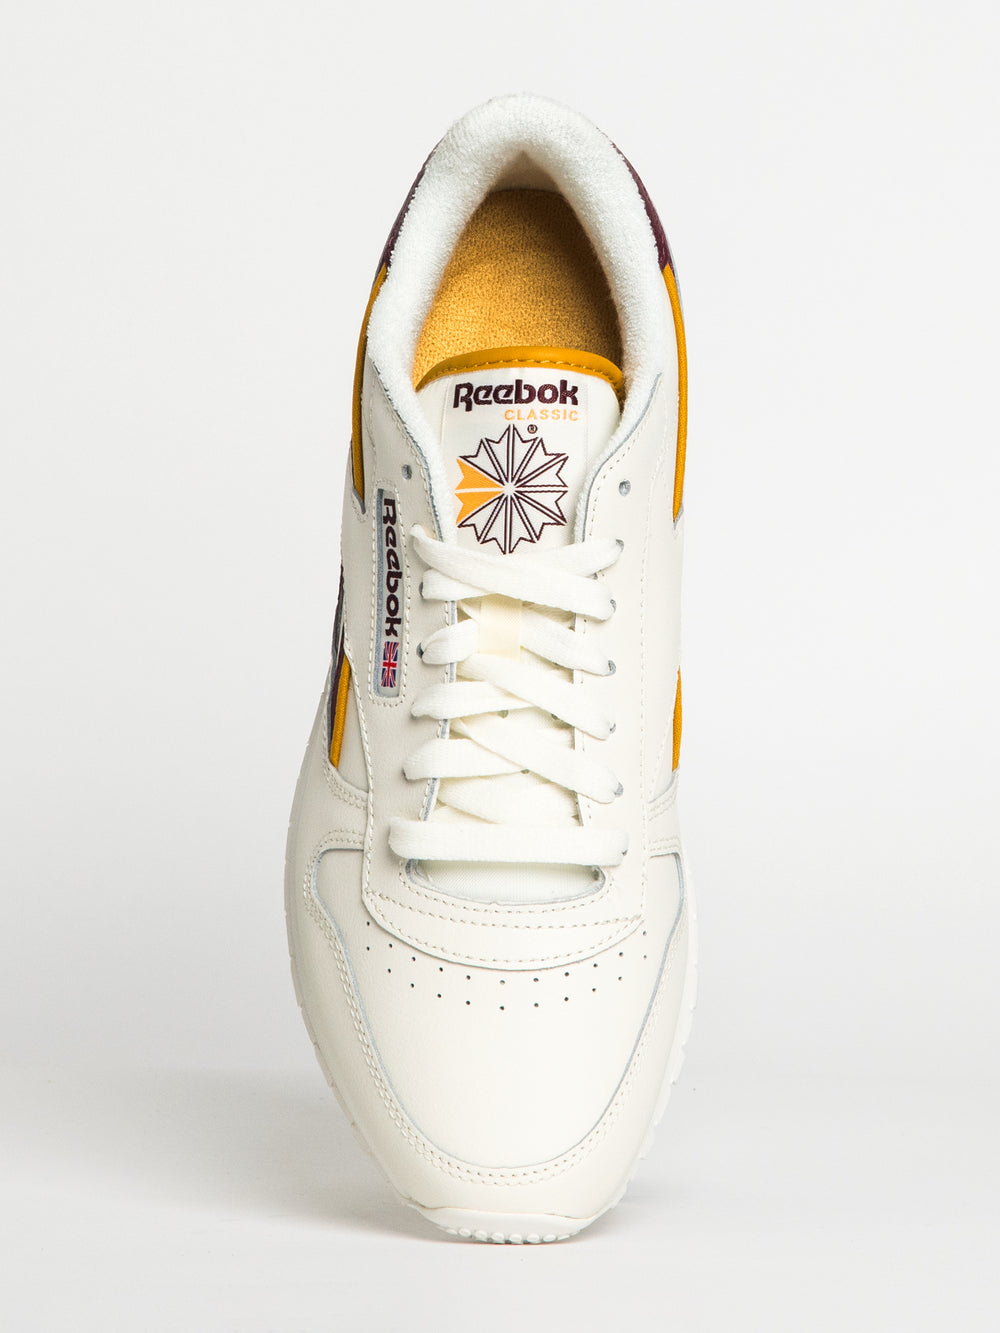 Collective SNEAKER REEBOK LEATHER | MENS Boathouse Footwear CLASSIC